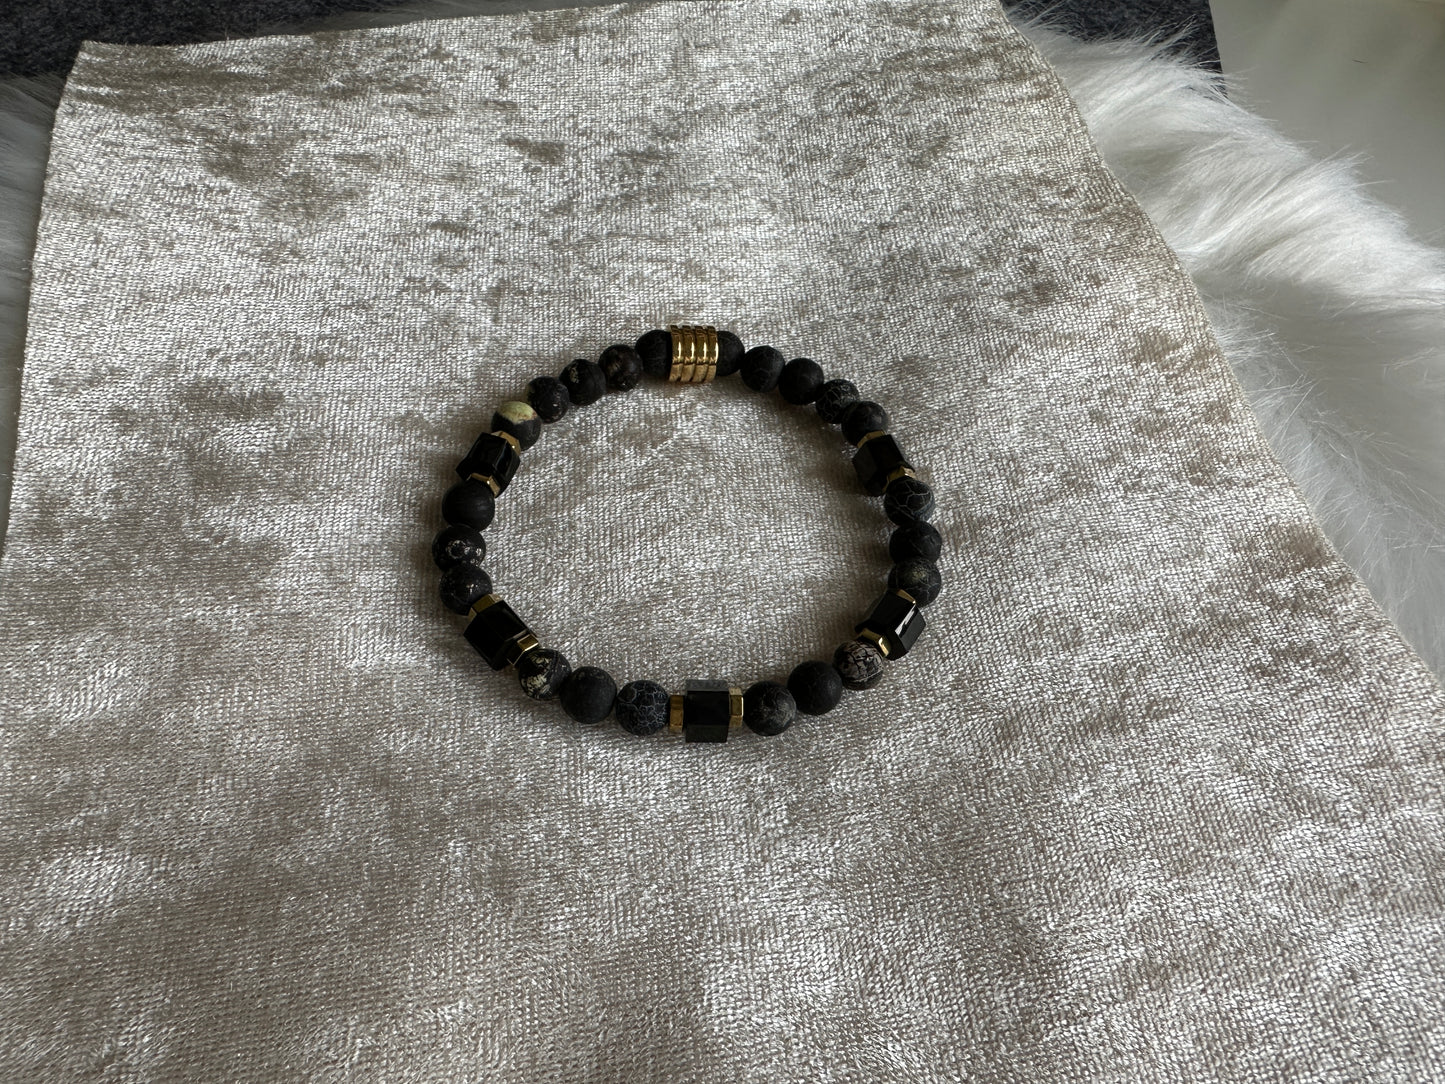 Black and Gold Fire Agate Bracelet